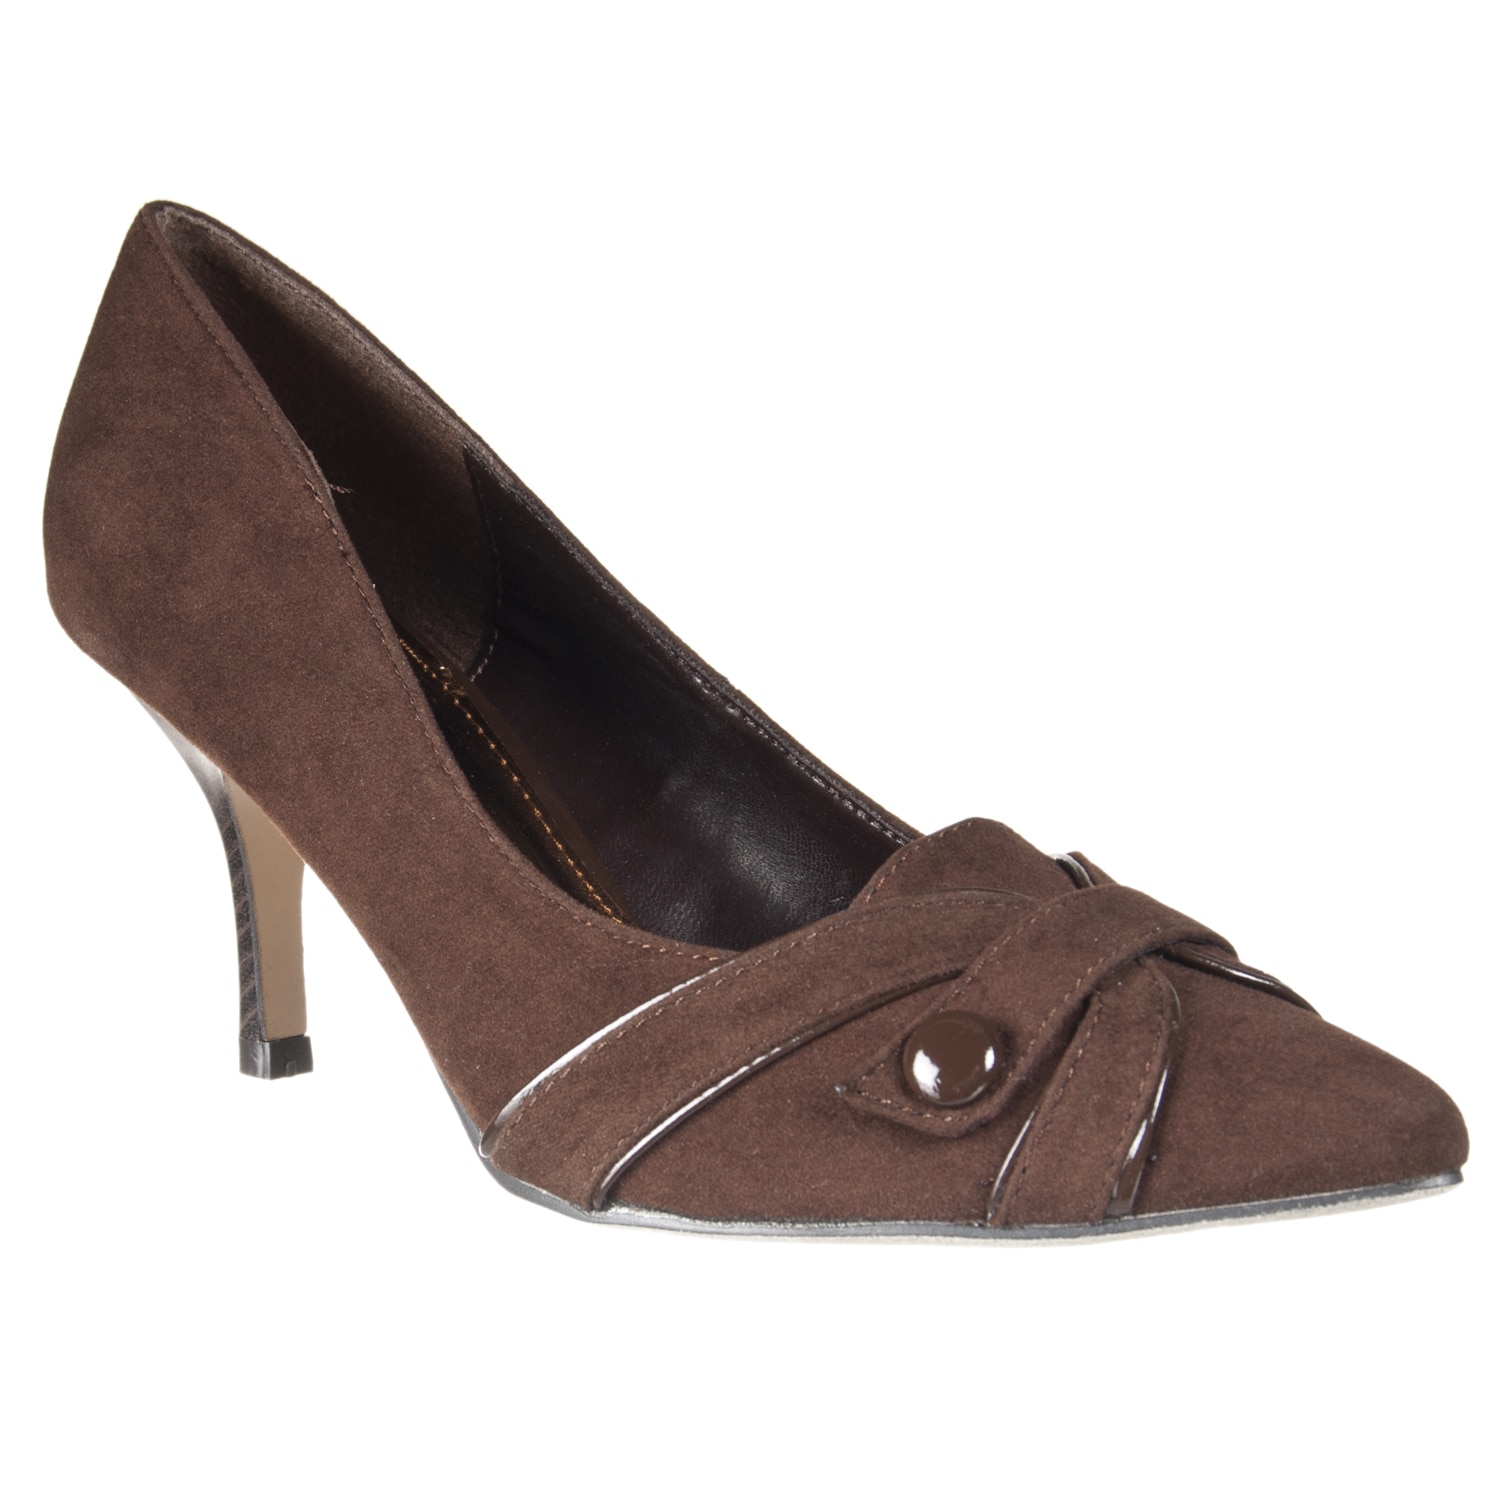 Riverberry Women's 'Exhbitor' Brown Pointed-toe Pumps - Free Shipping ...